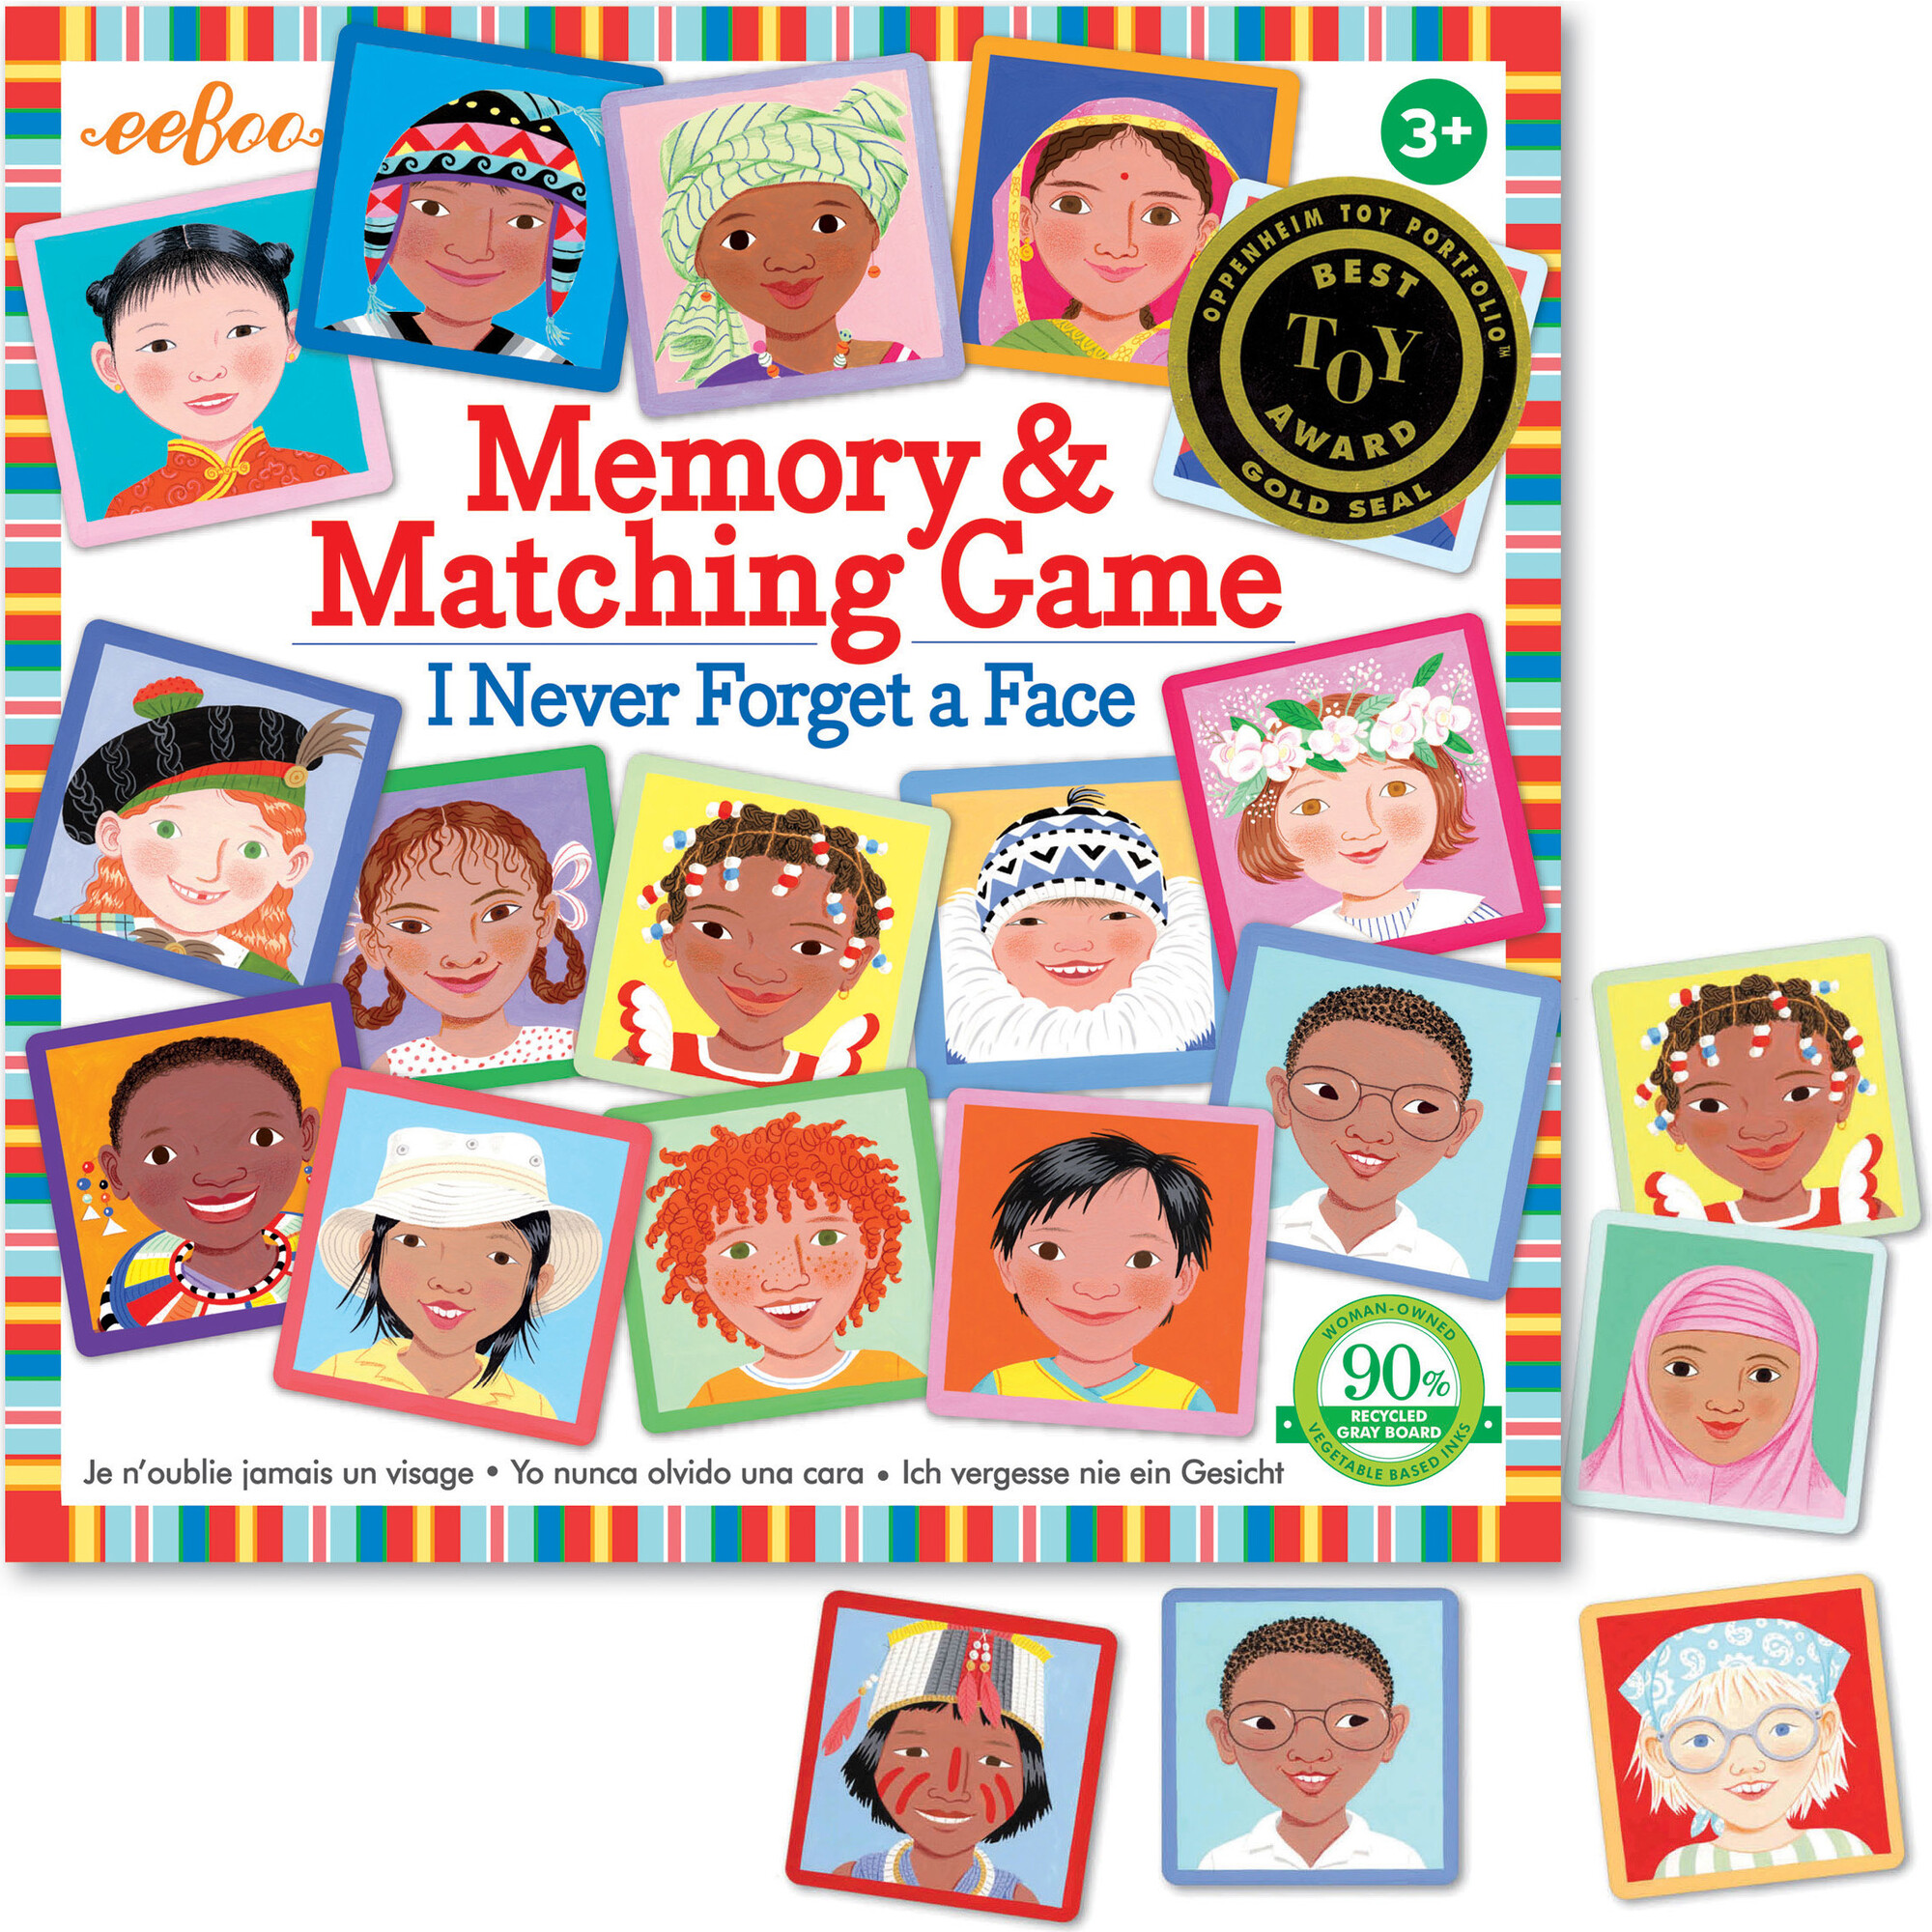 MATCHING GAME 2008 COMPLETE GREAT CONDITION I NEVER FORGET A FACE EEBOO CORP